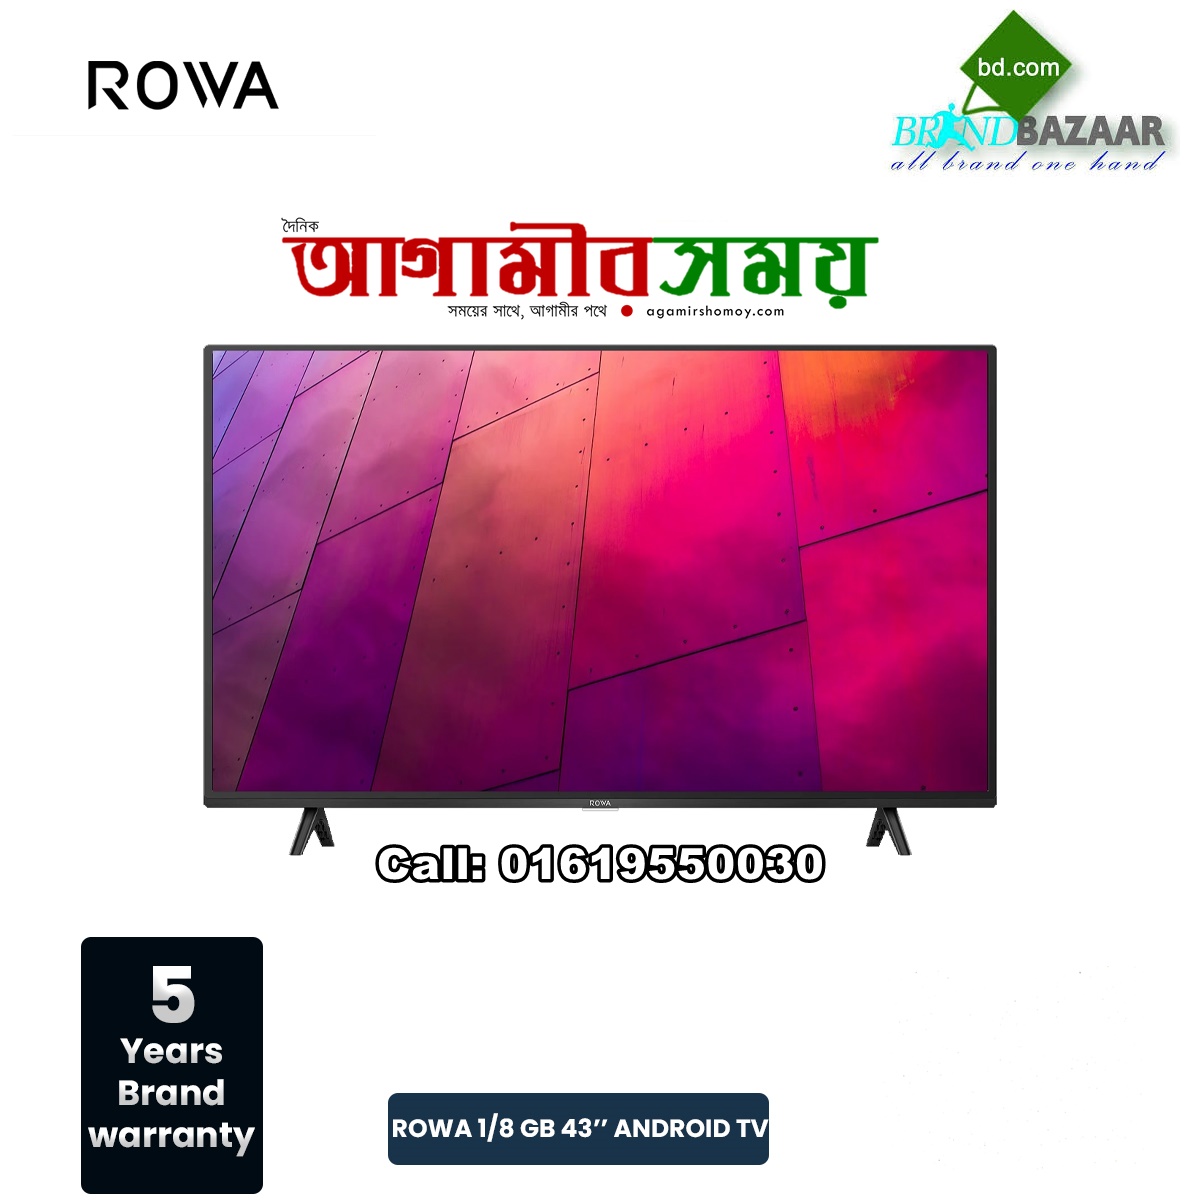 ROWA 43 inch Full HD 43S52 Android Smart Voice Control LED TV